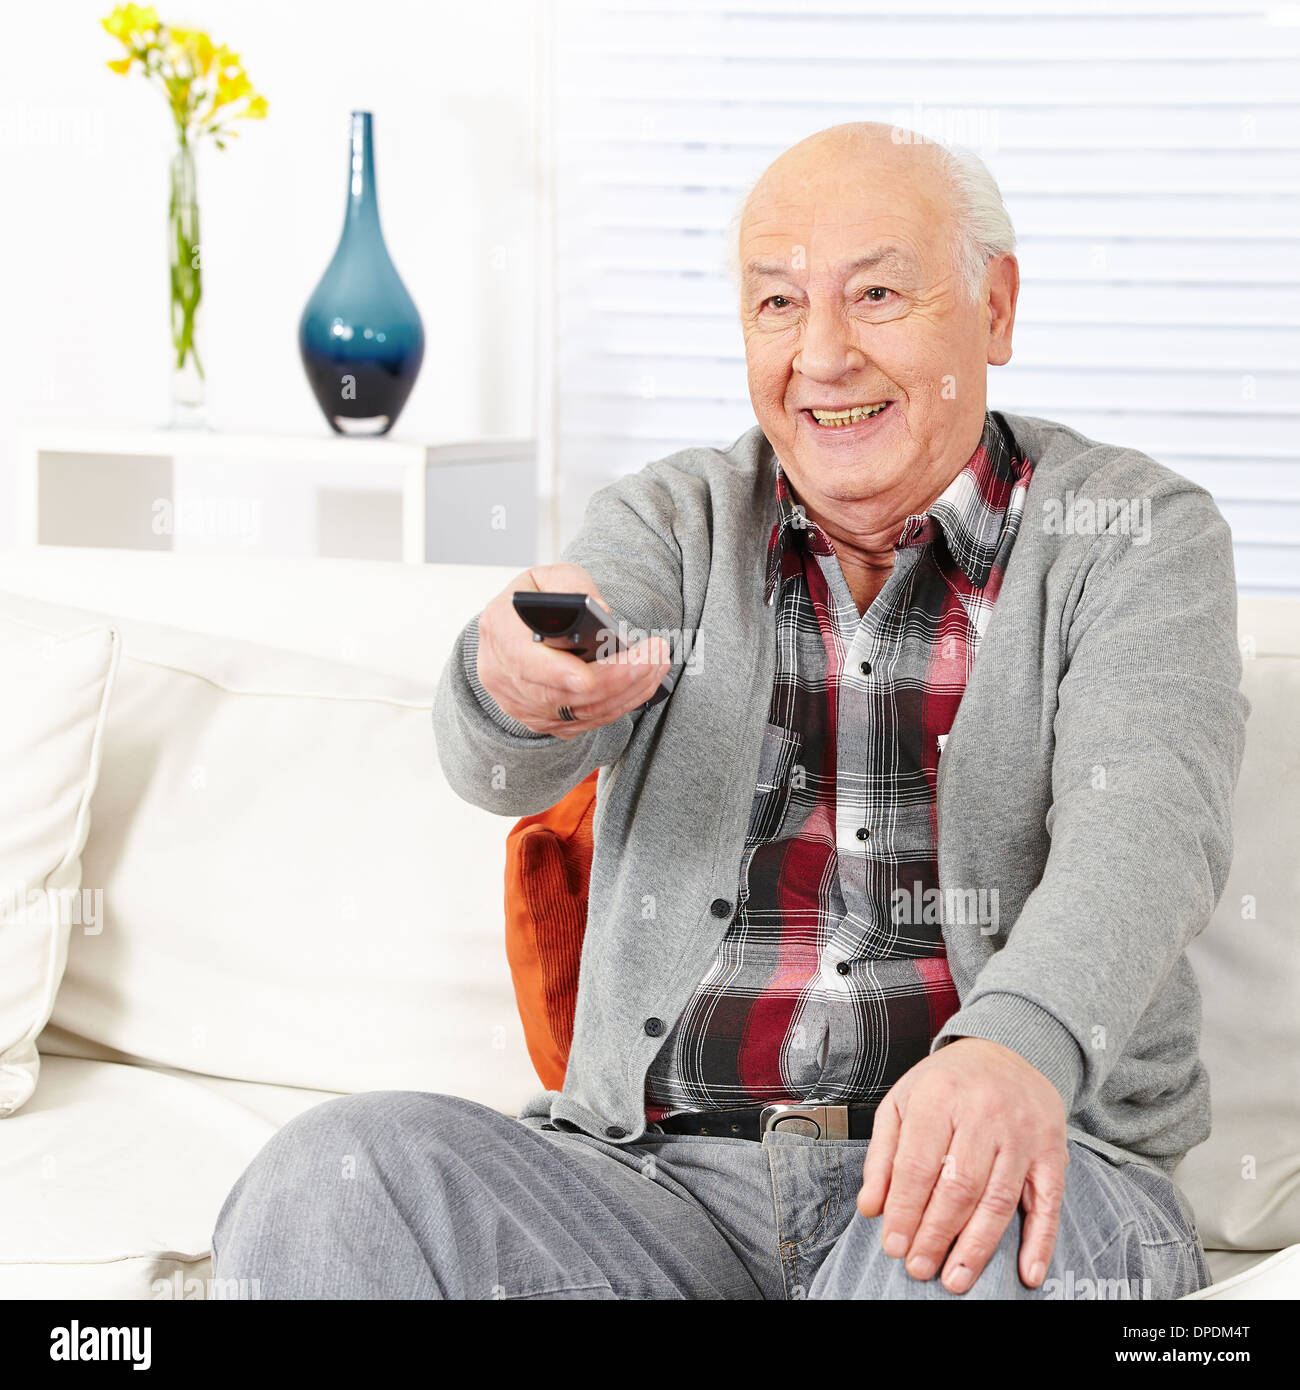 Happy senior citizen man watching TV with remote control Stock Photo